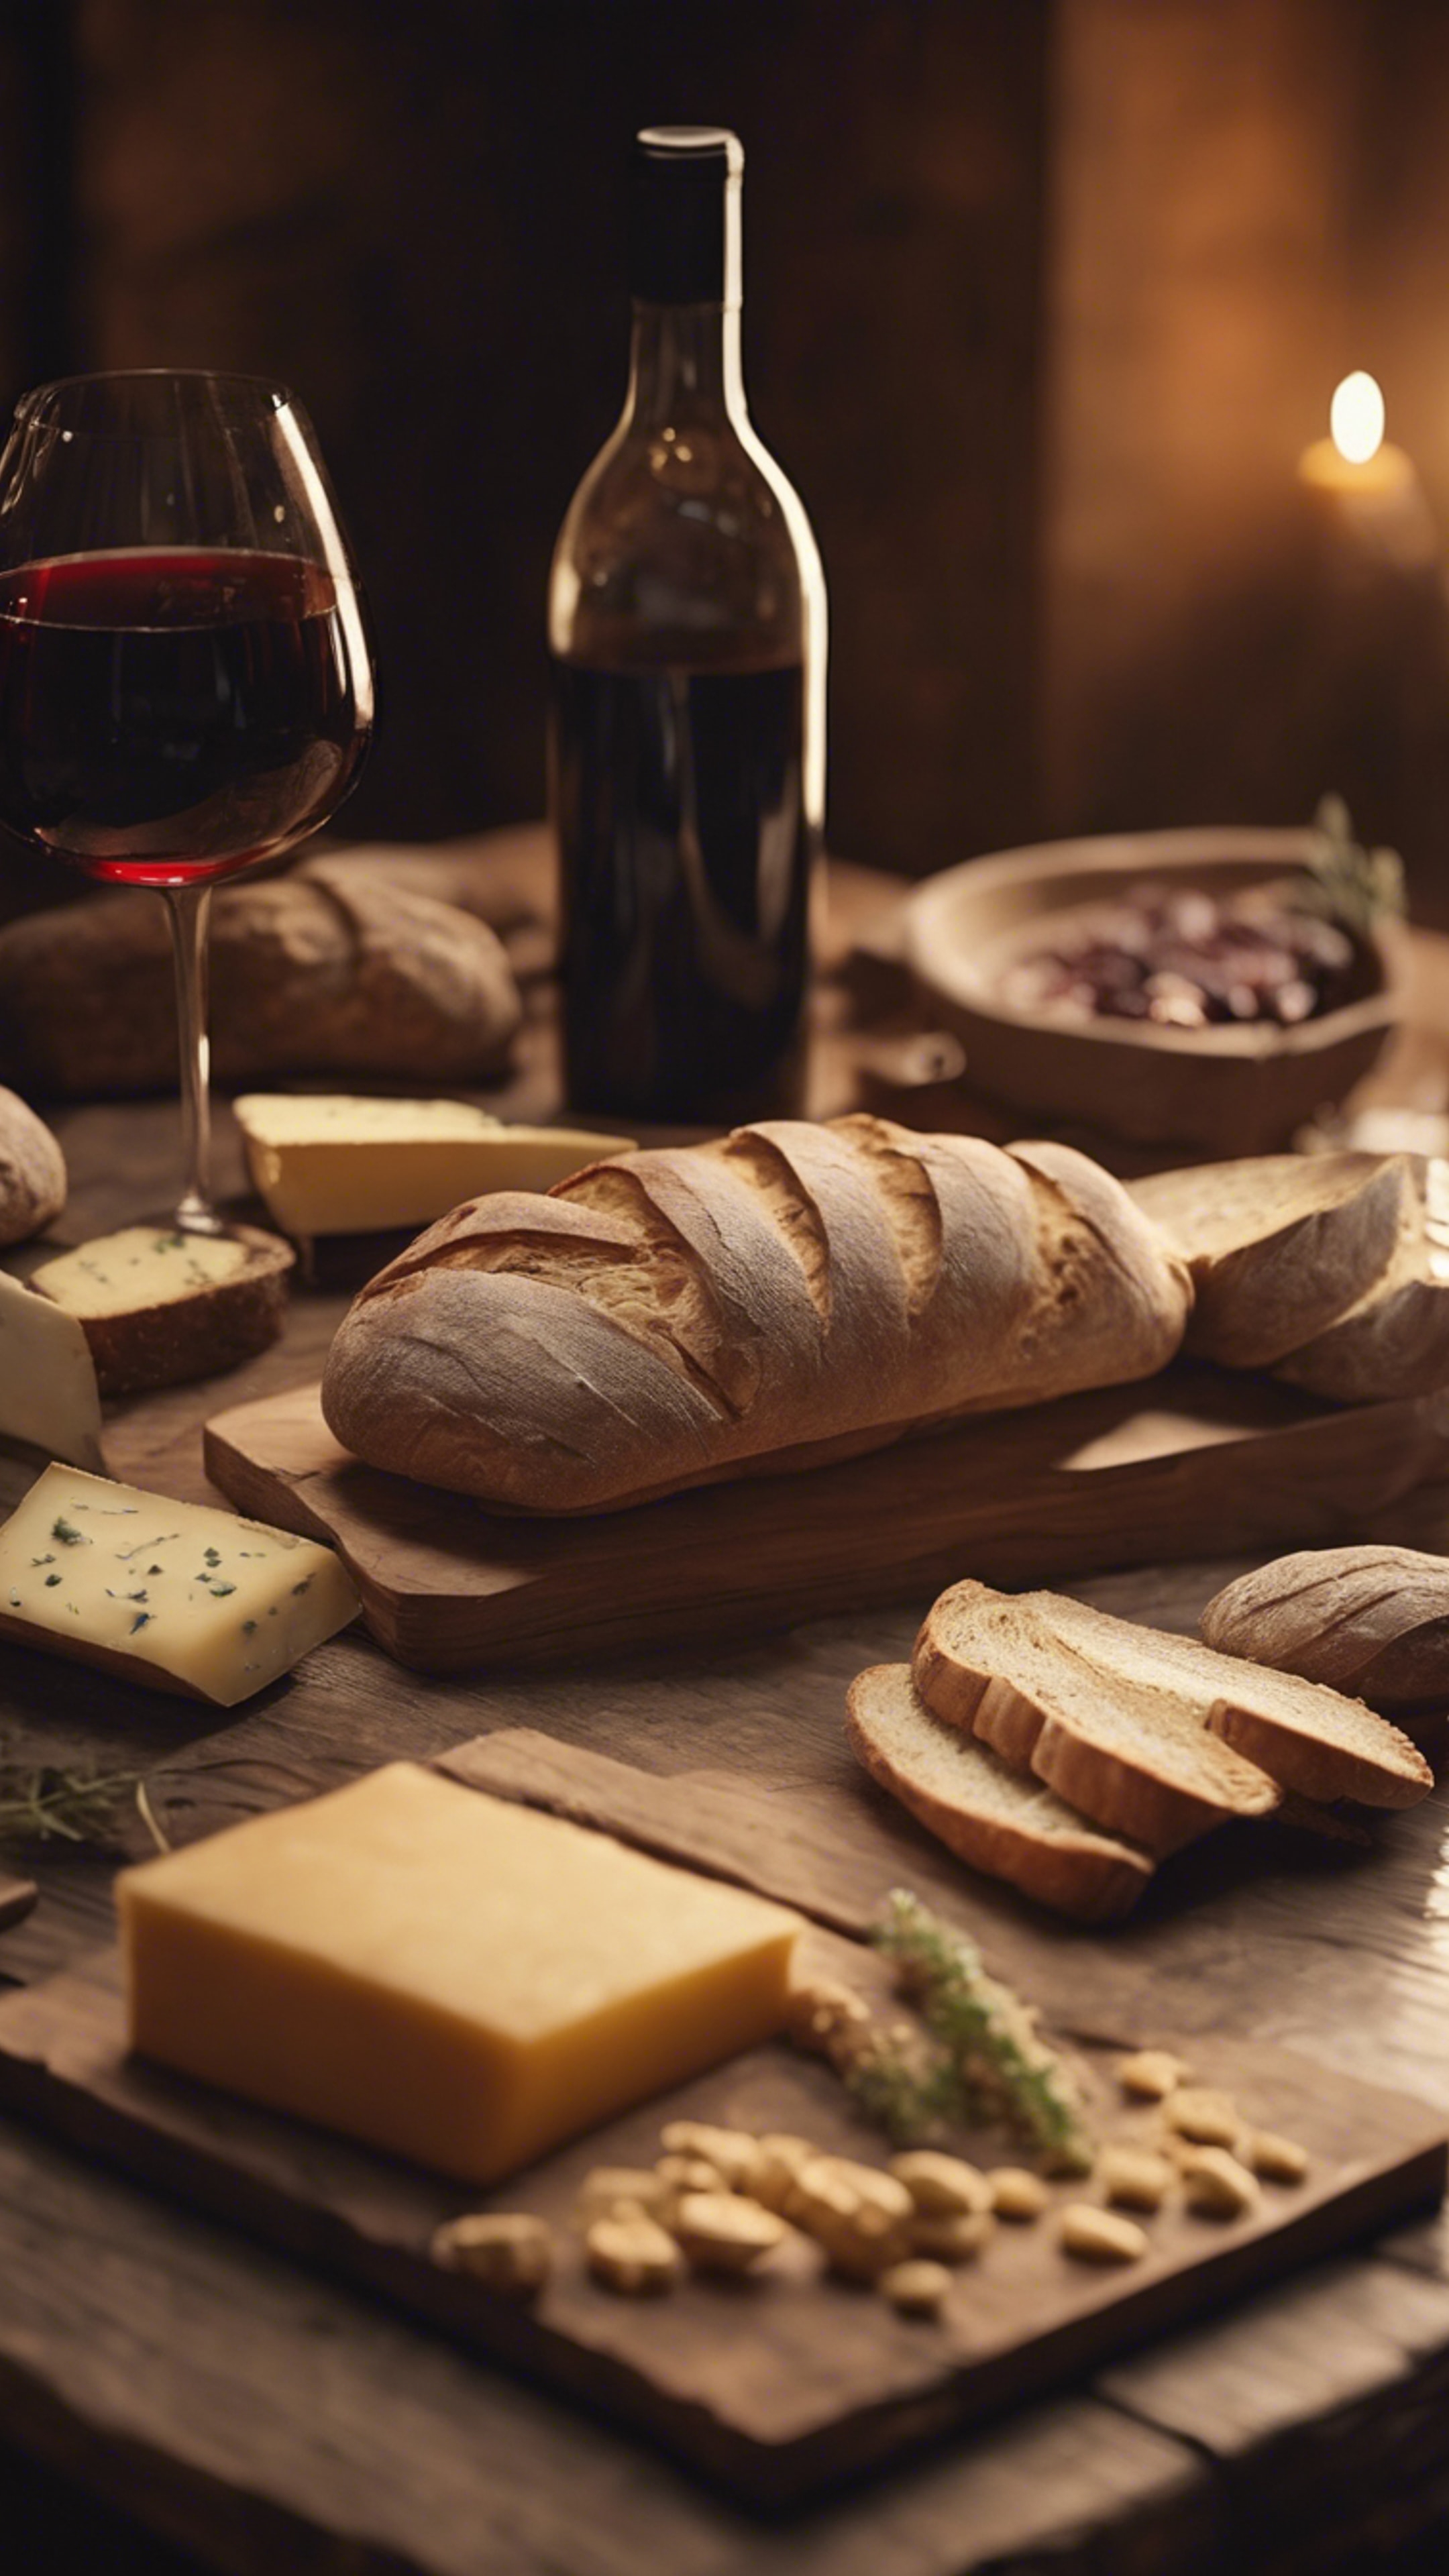 Detailed close-up of a rustic French country-style wooden table set with fresh bread, wine, and cheese under warm interior lighting.壁紙[6a74bb7d88b74d998281]